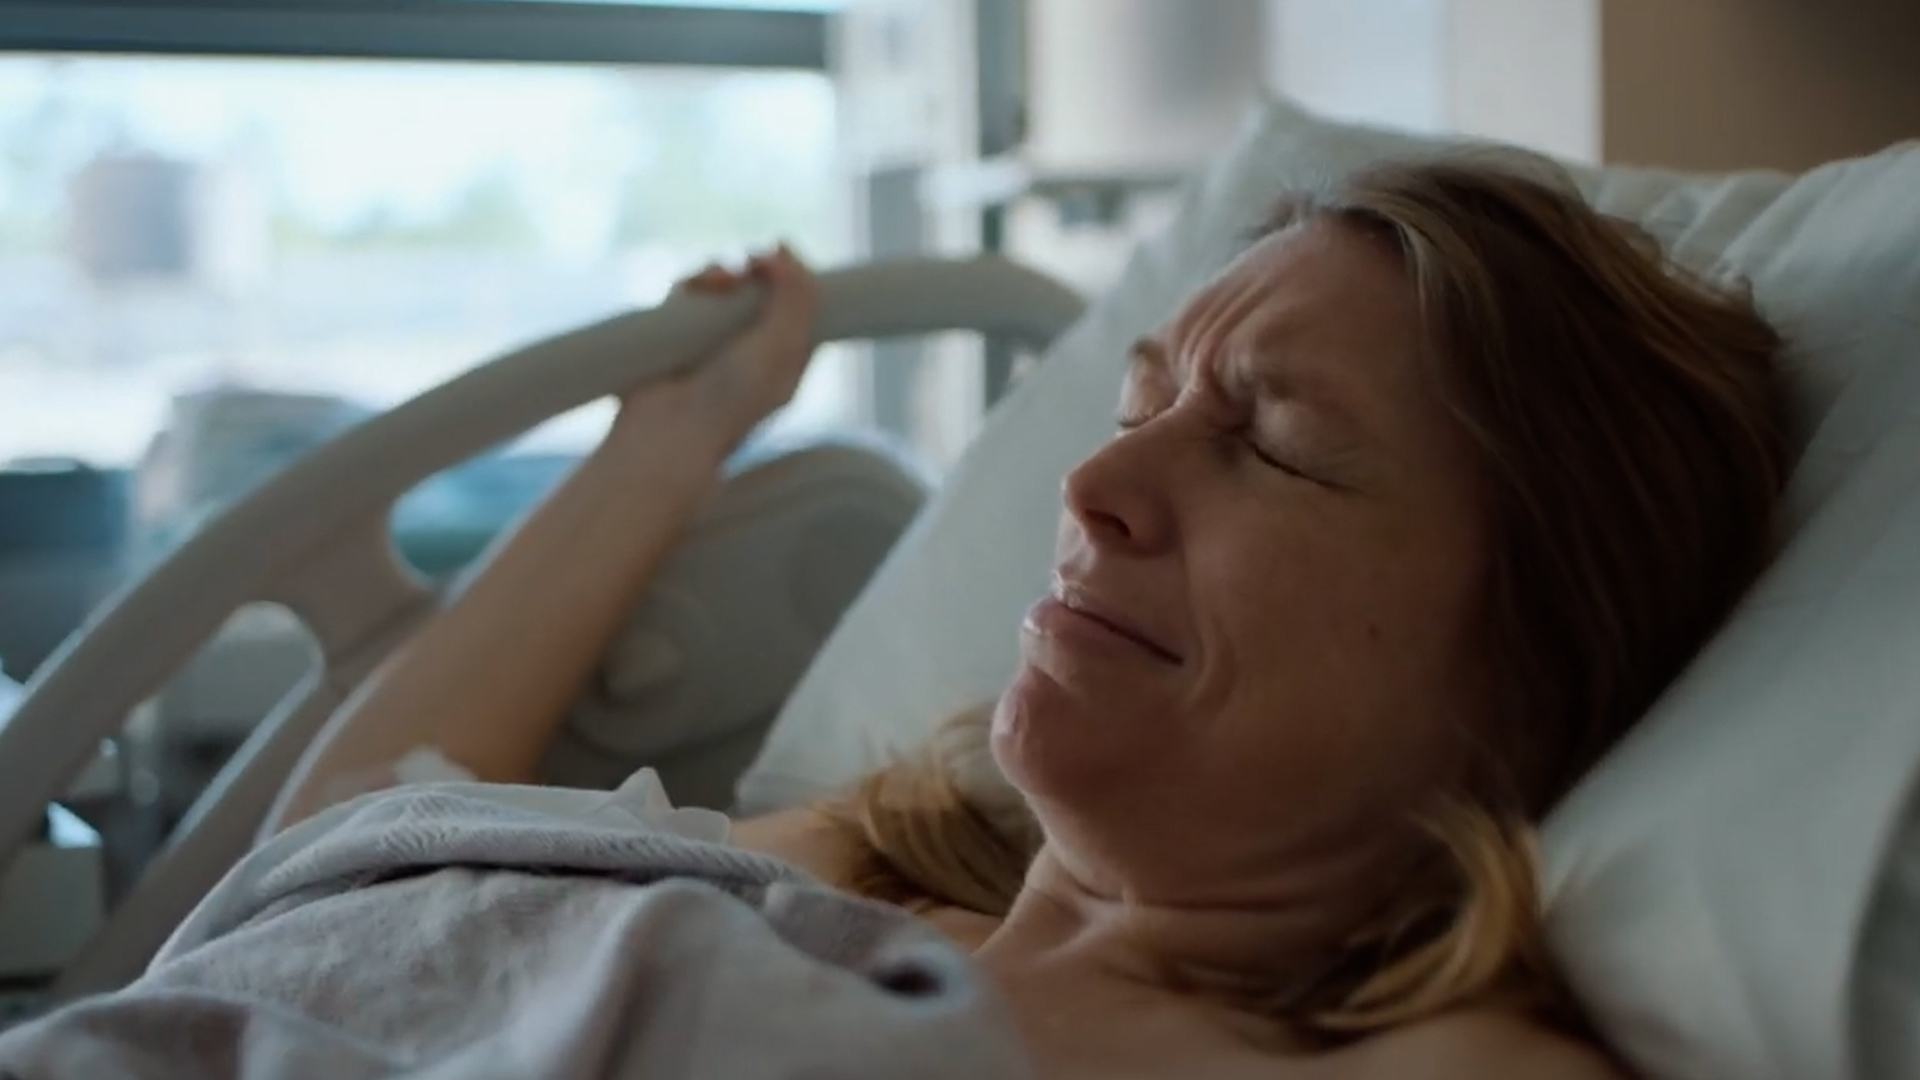 Democrat candidate promotes abortion in TV ad depicting her giving birth